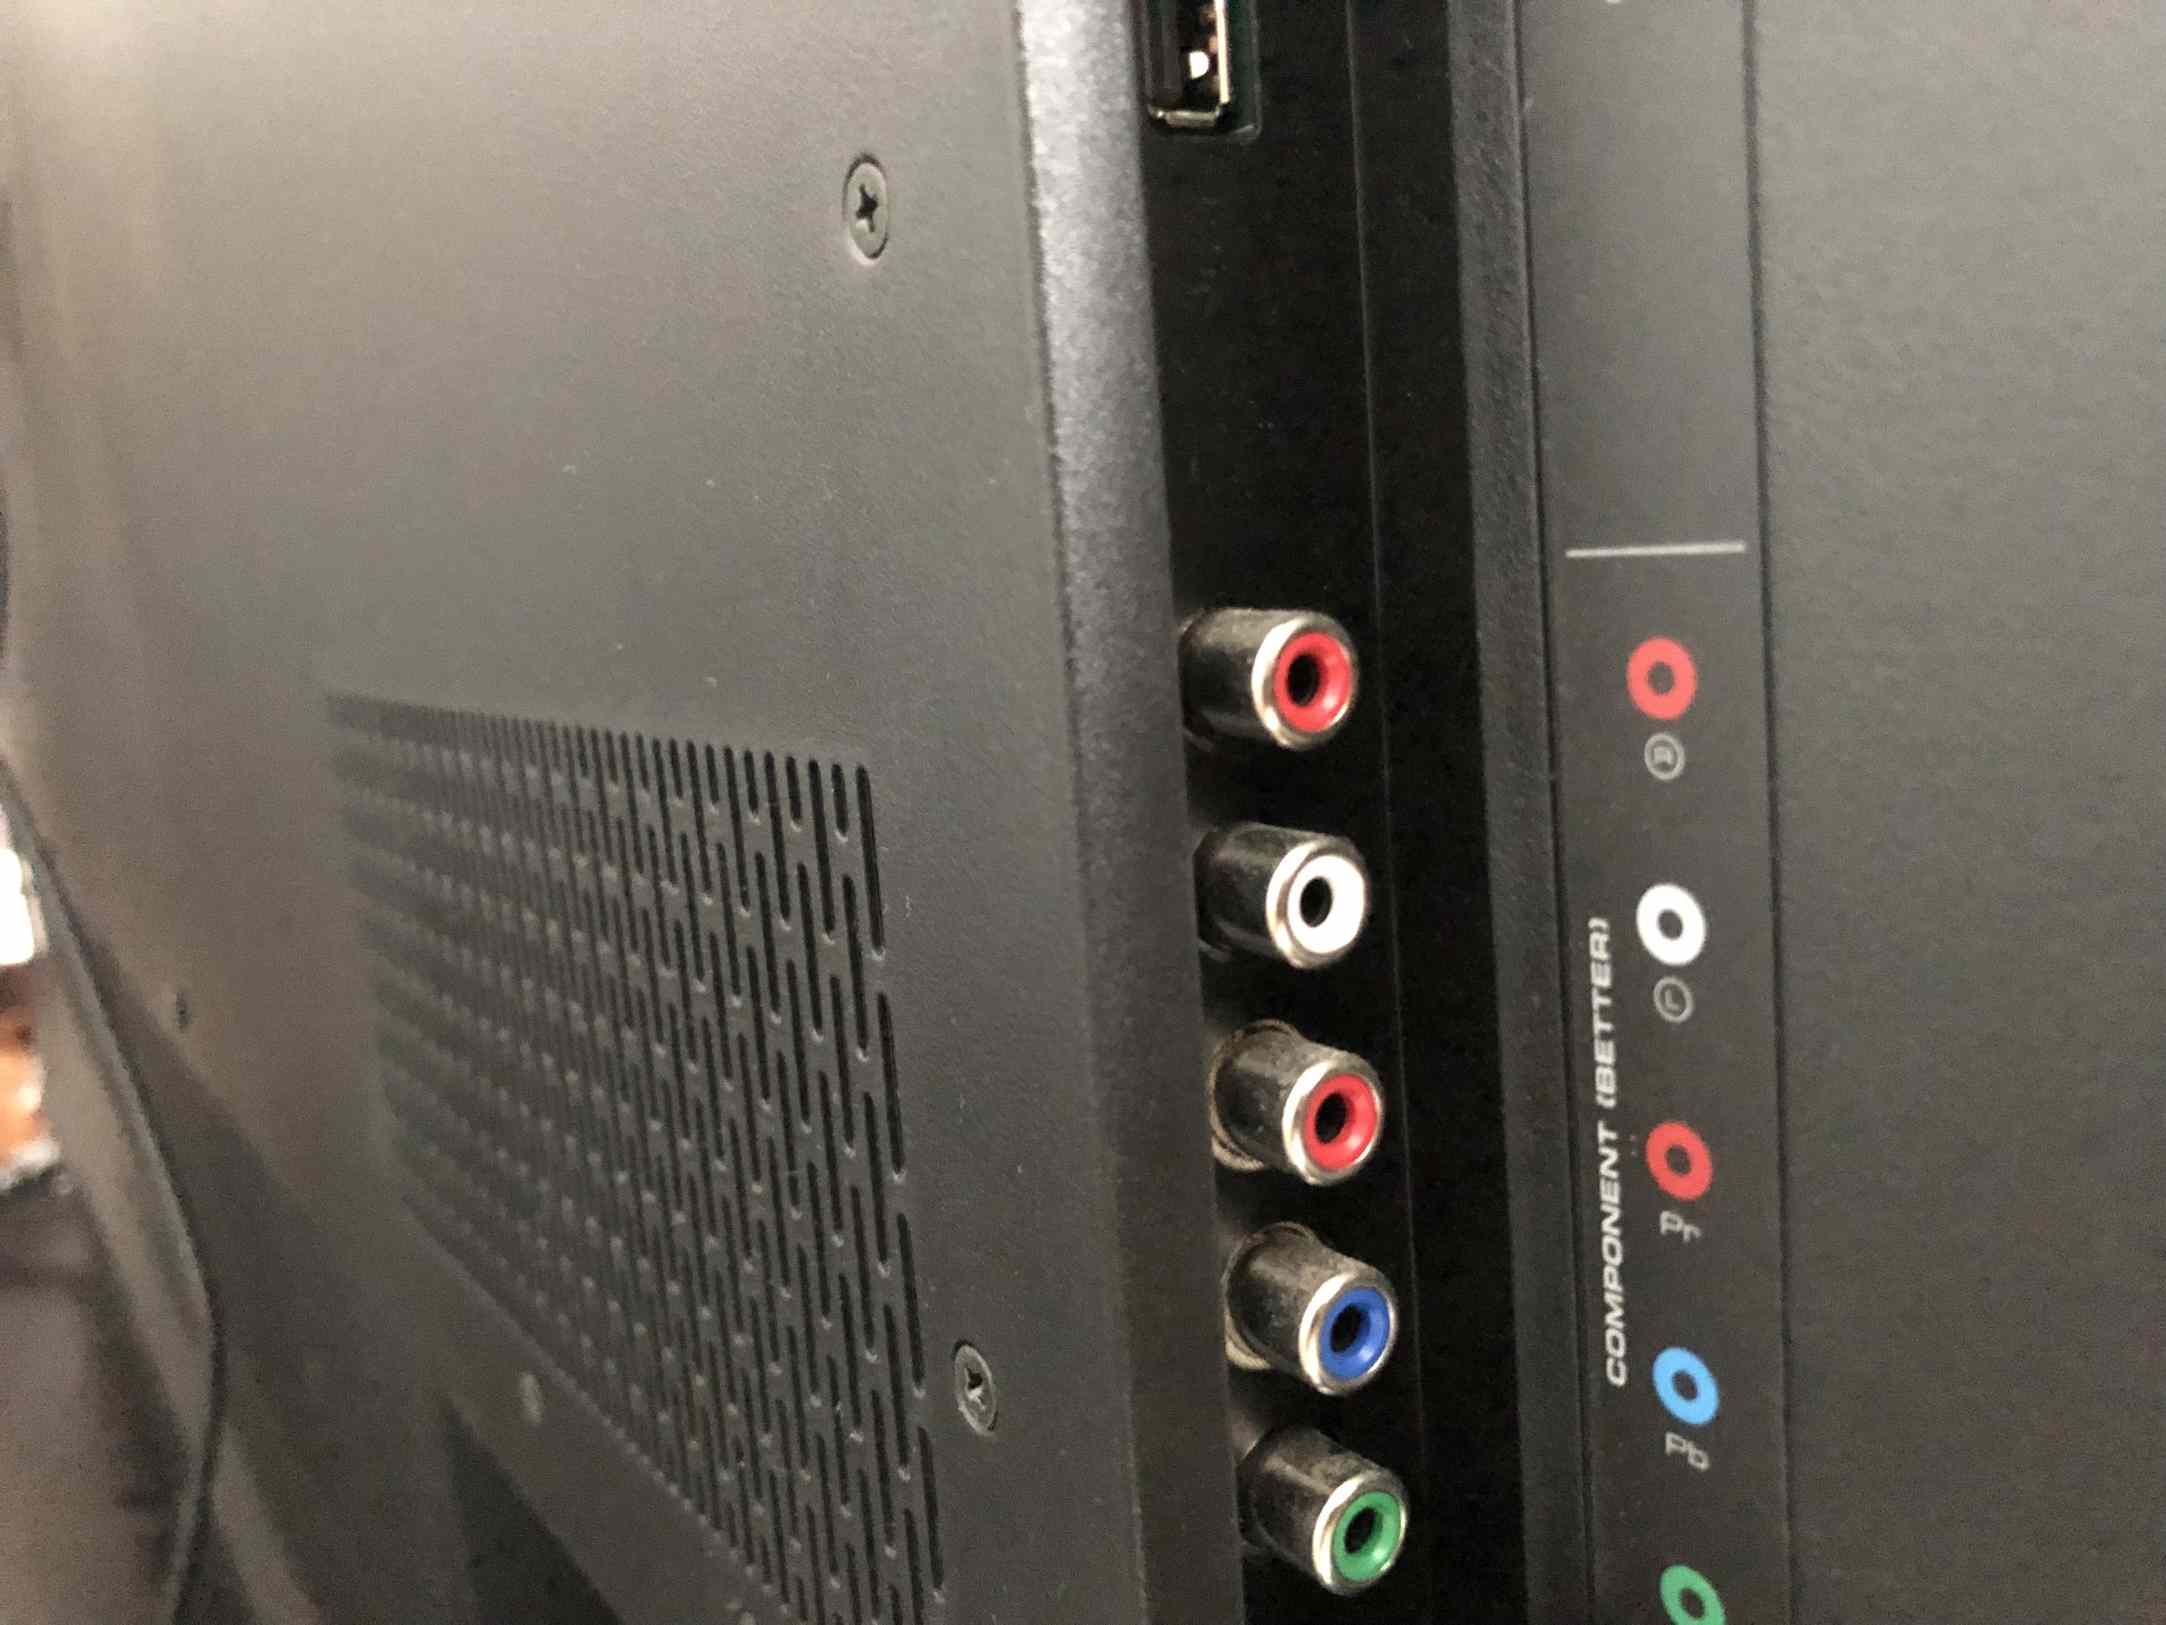 How to Connect PS4 to a TV Without HDMI